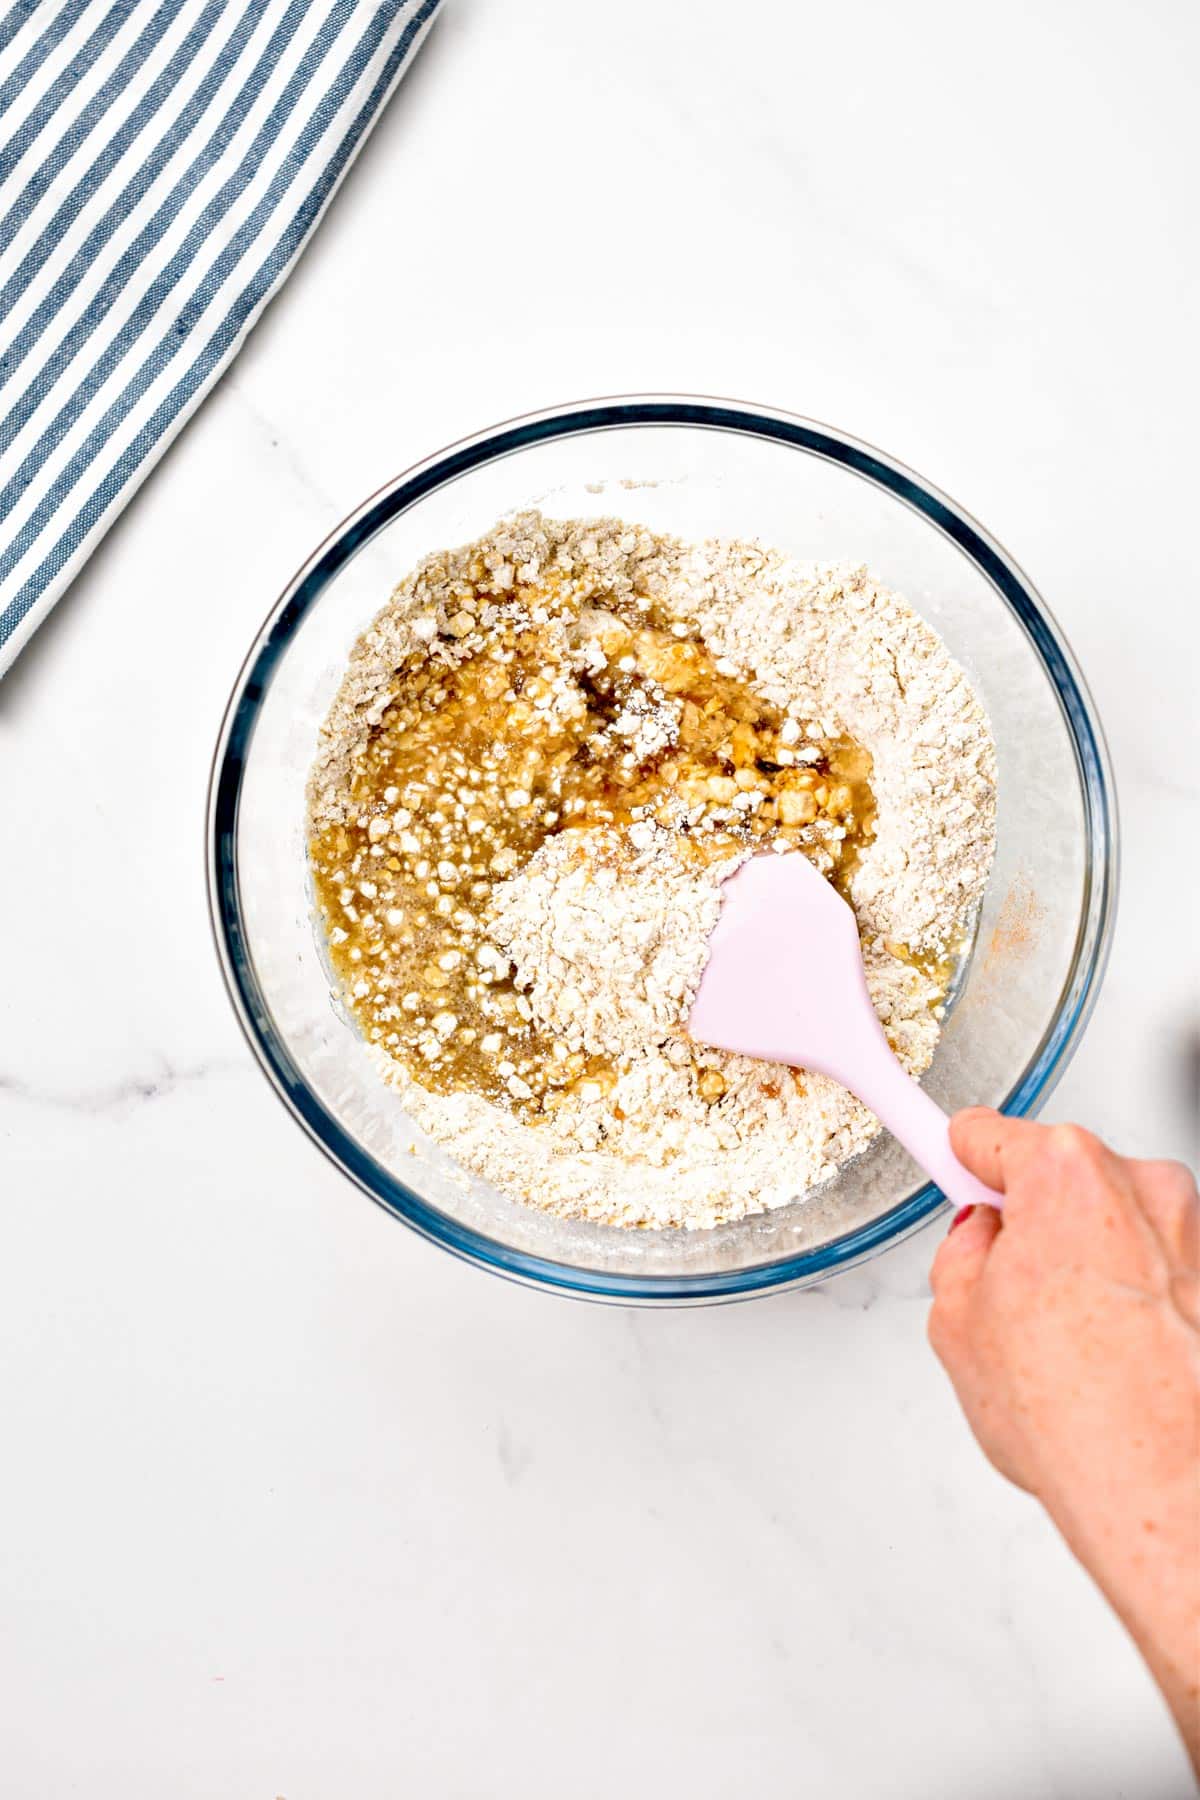 A pink spatula stirring the ingredients of a Raspberry Oat Bars.